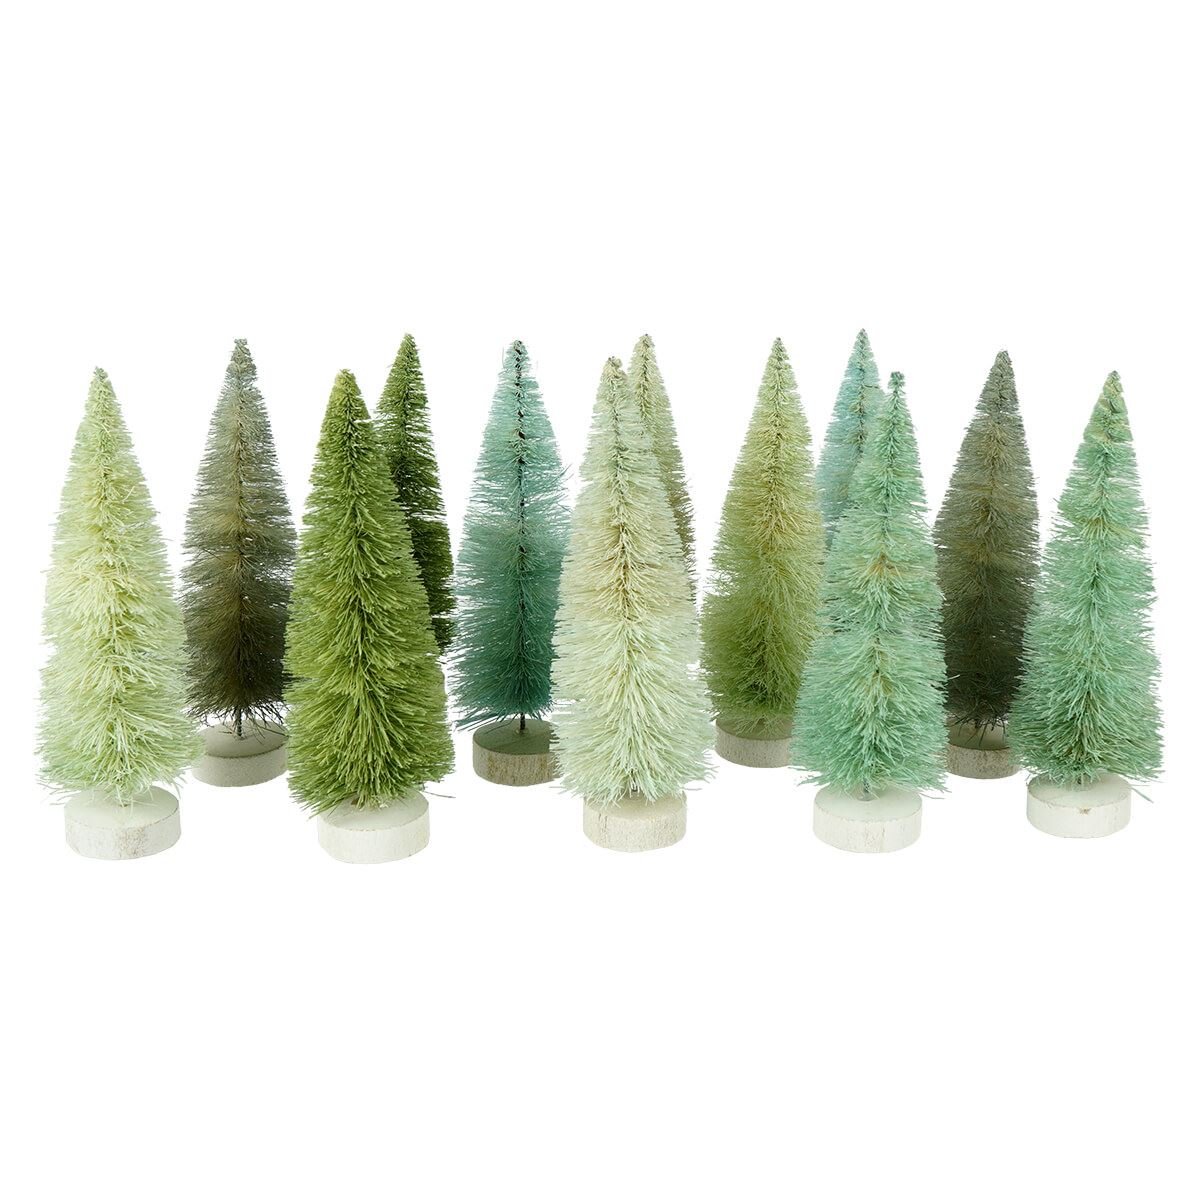 Winter Green Trees Boxed Set/12